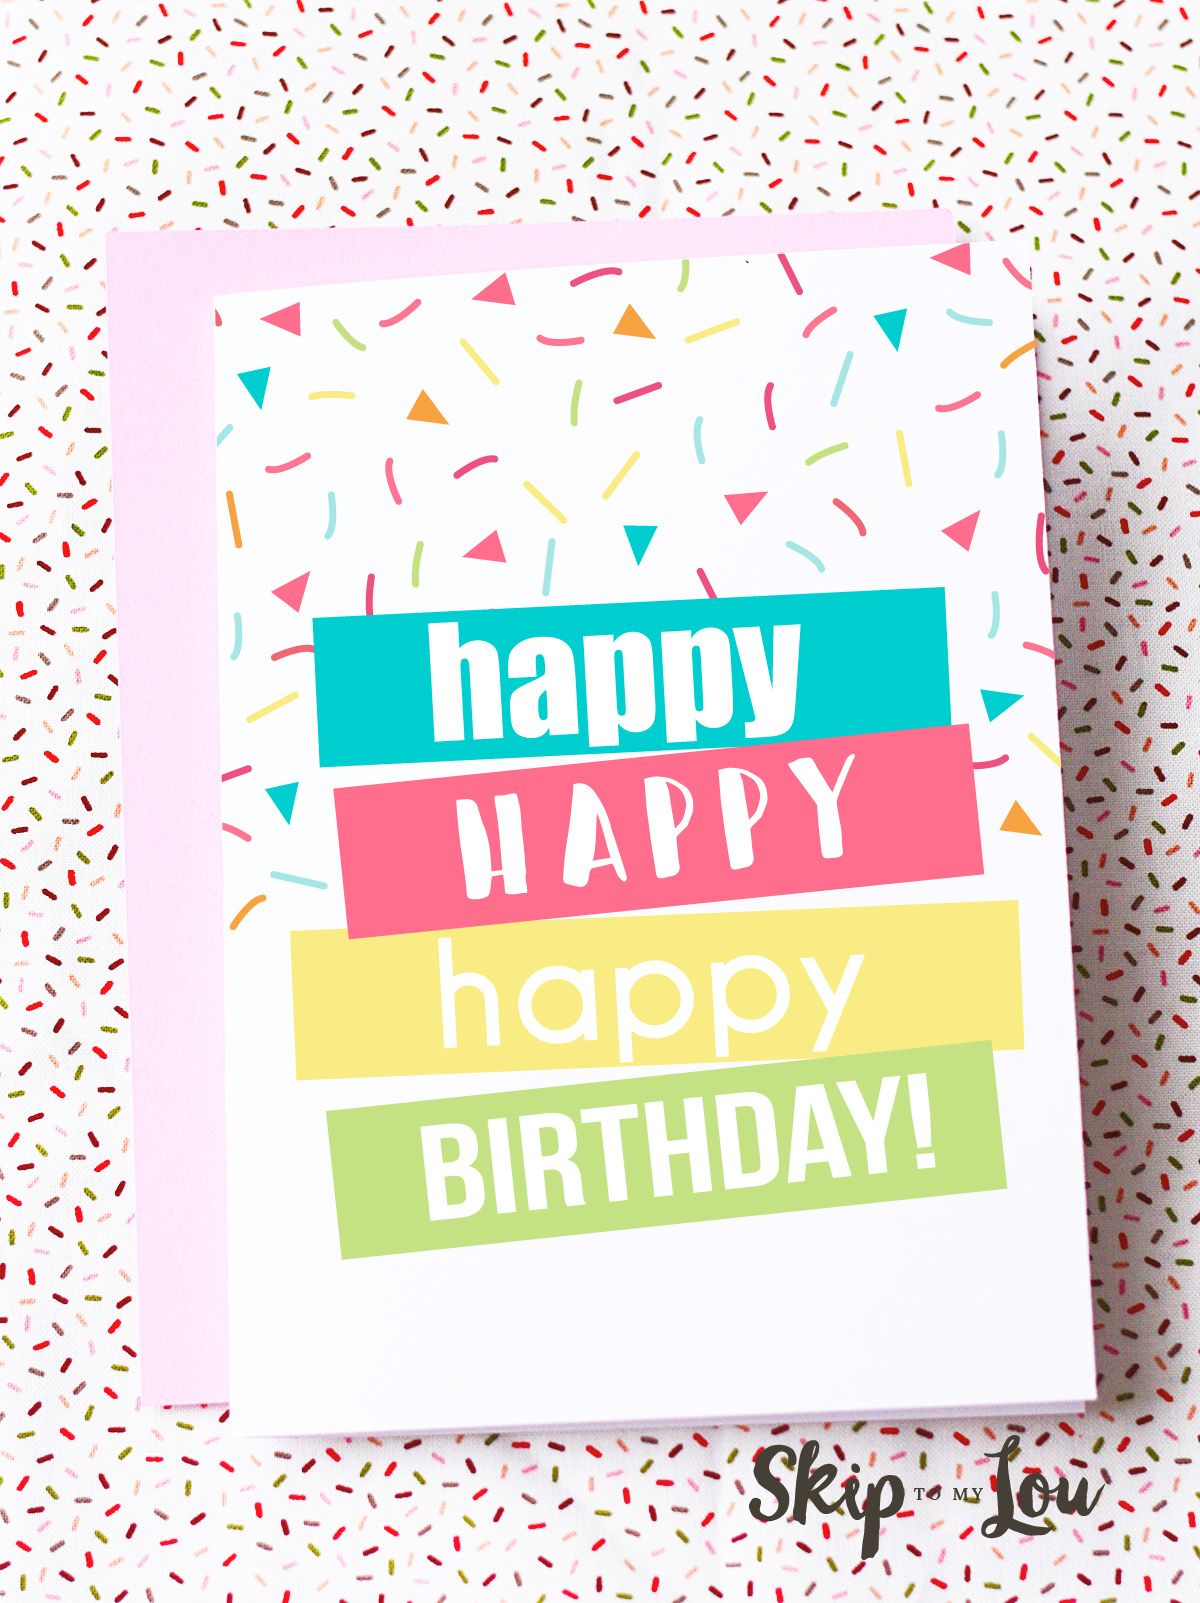 Printable Birthday Cards for Him or Her - Print Happy Birthday Card